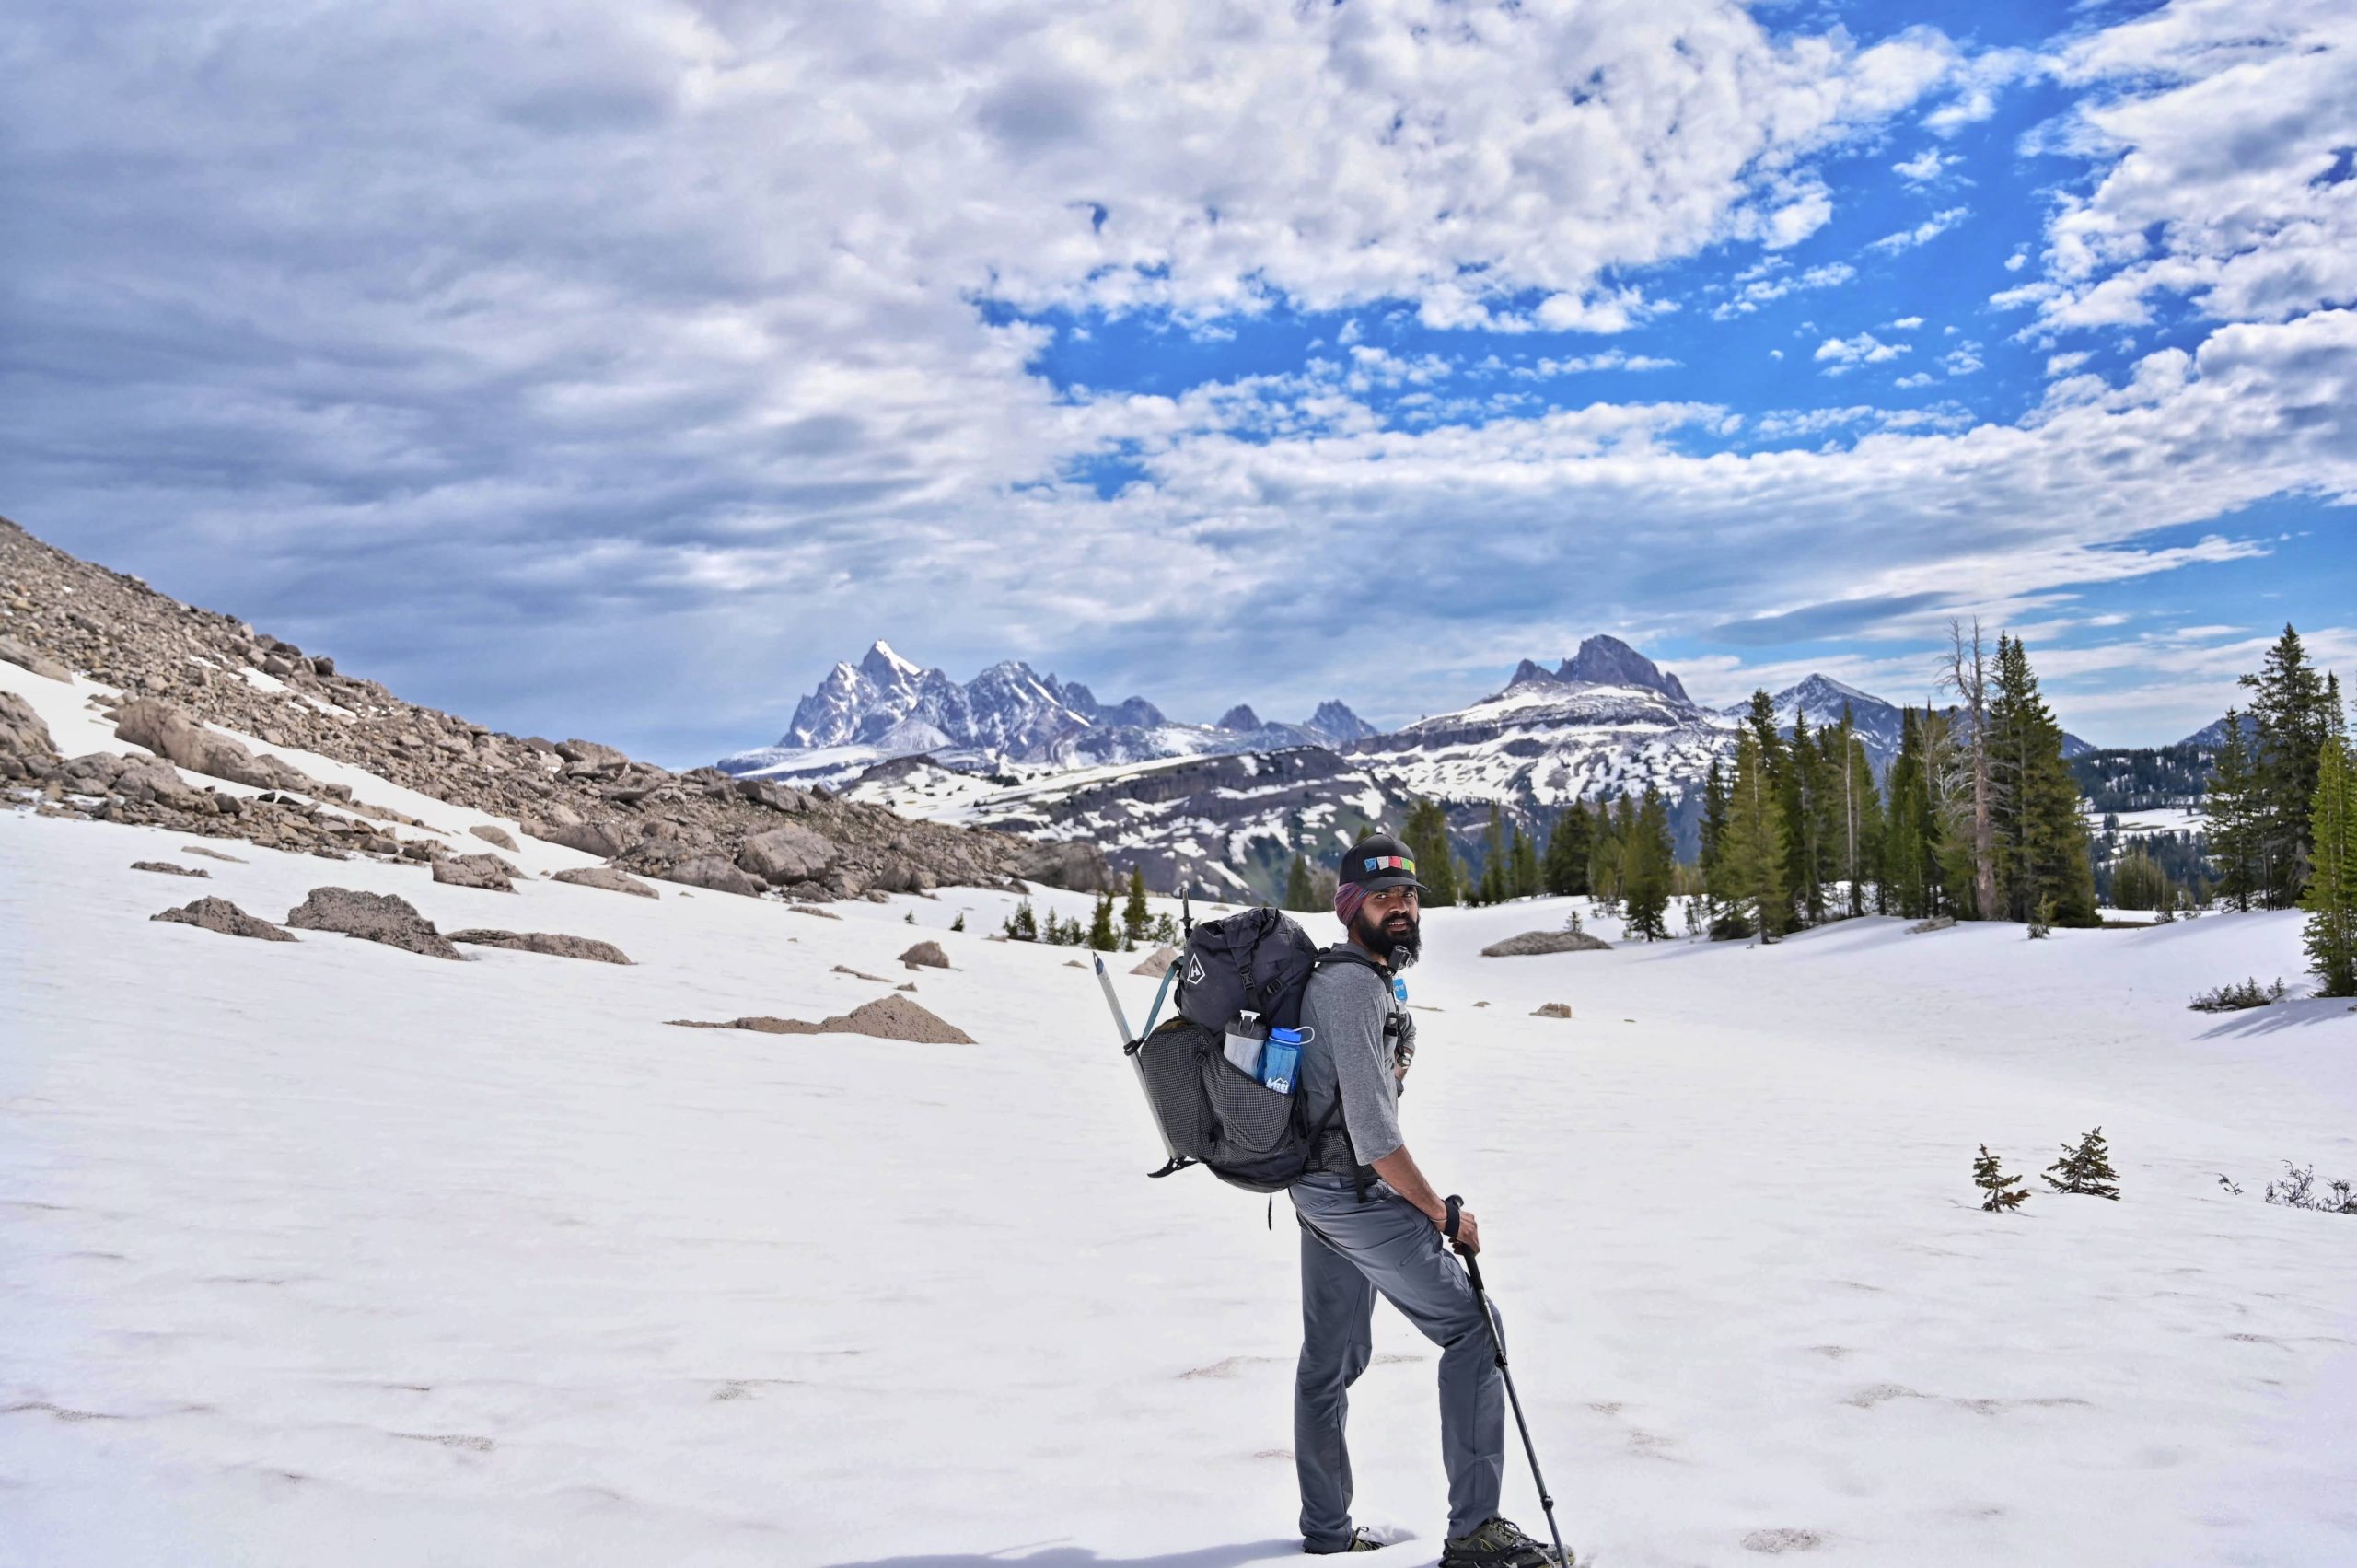 Anu stands in a snowfield with jagged peaks in the background. He's holding hiking poles and carrying a big backpack.